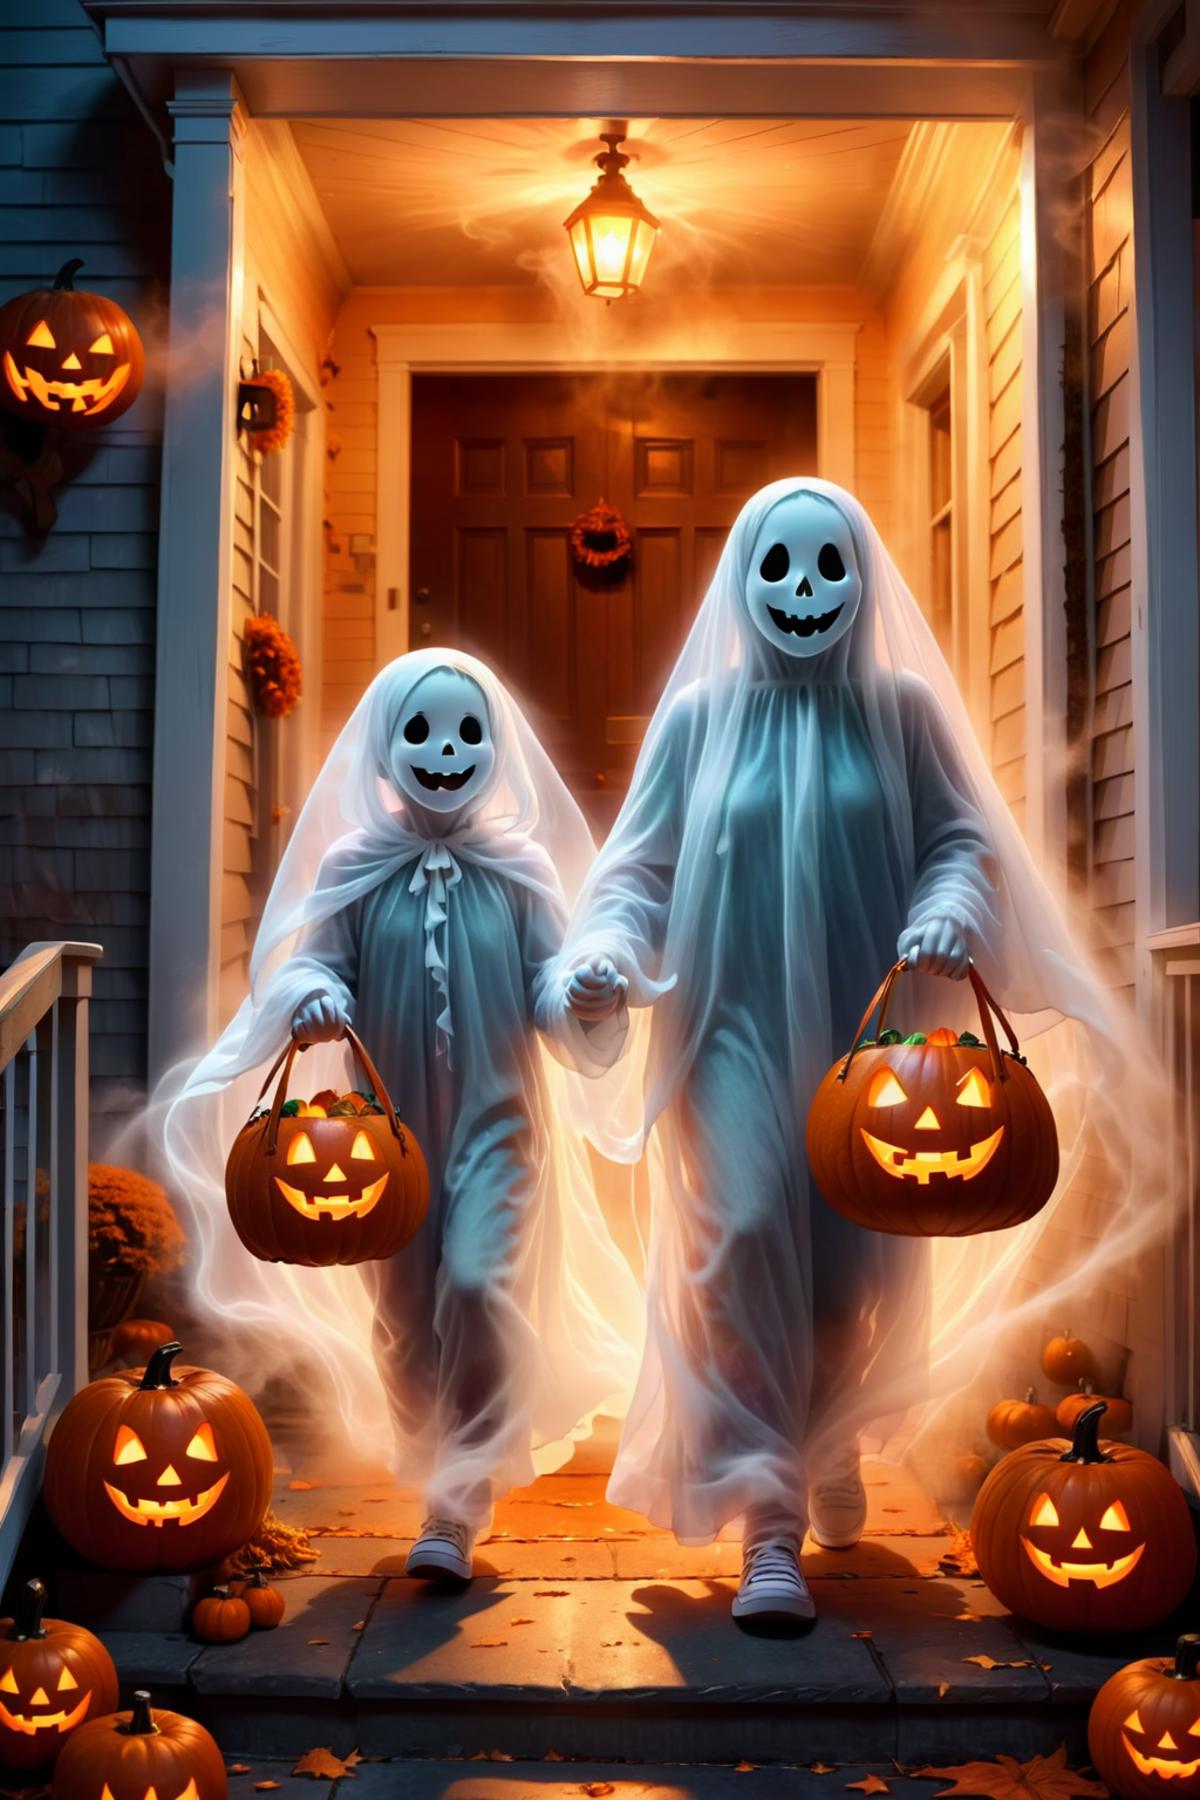 Halloween Scene with Two Girl Ghosts and Pumpkins